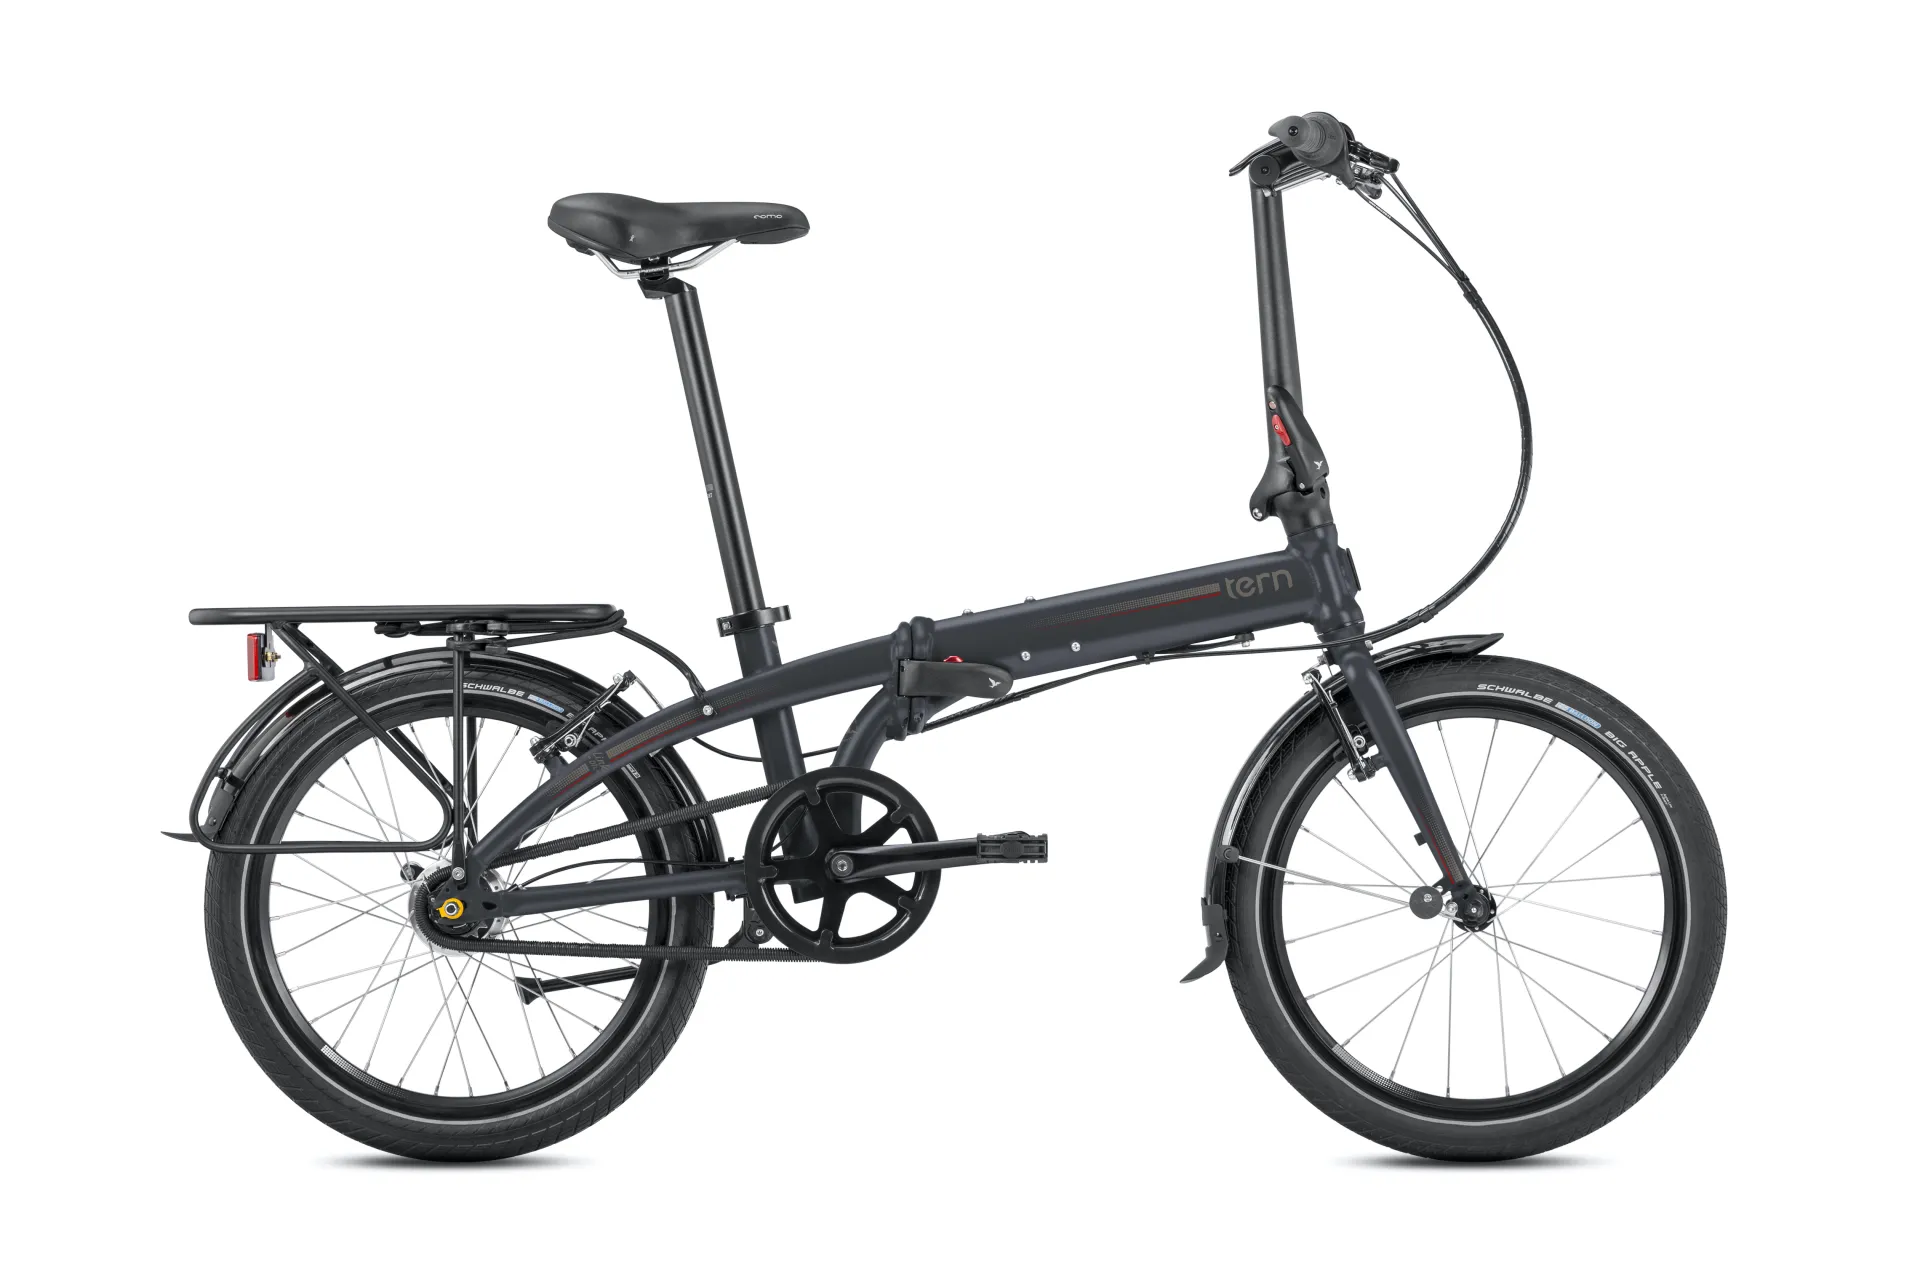 Link D7i | Tern Bicycles